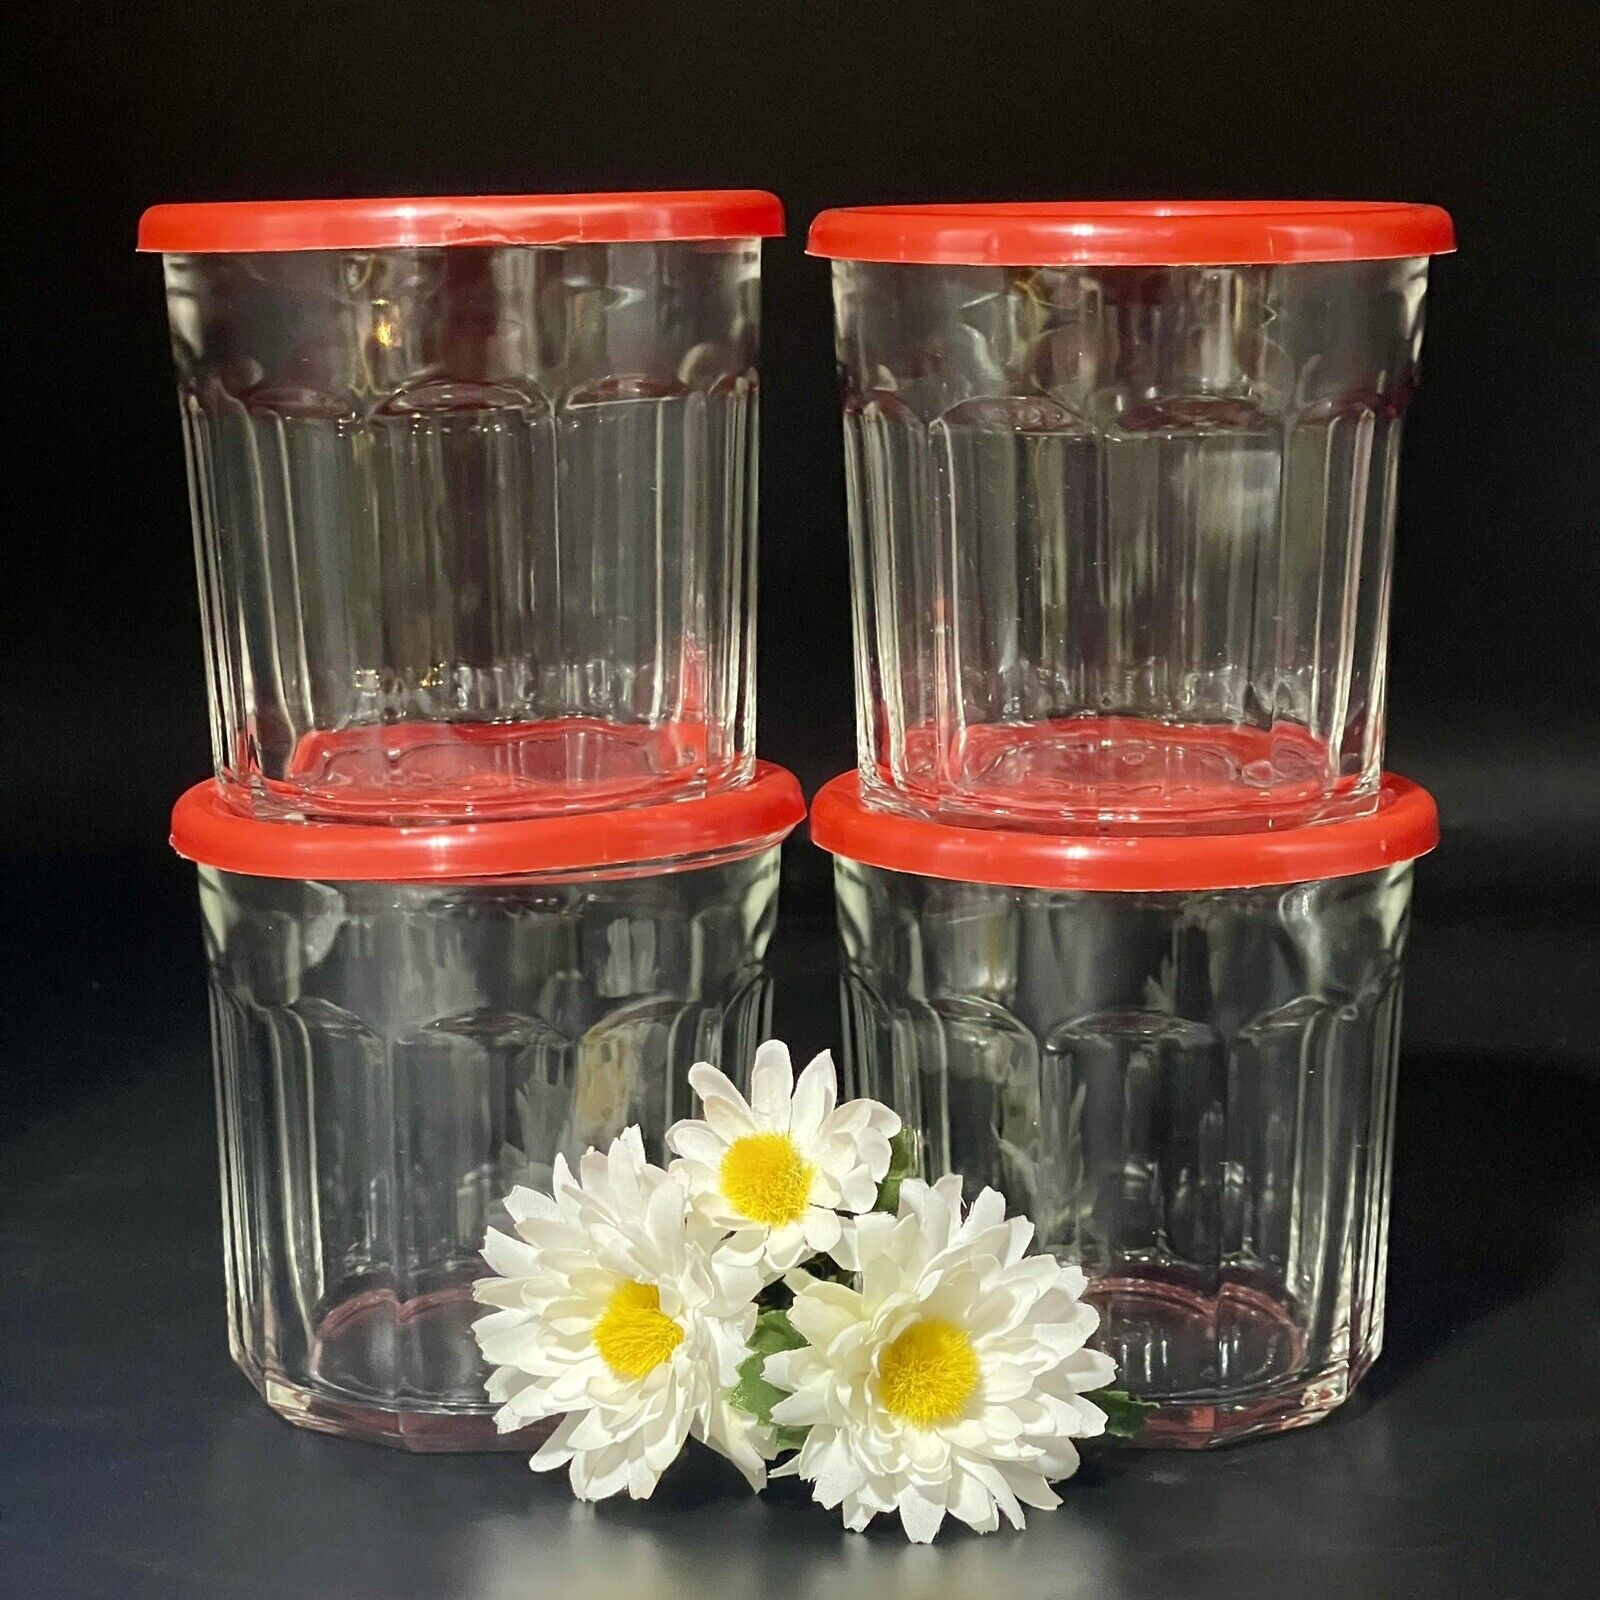 LUMINARC France 500 ml Jam Jar 10 Sided Glass Containers Red Lids VTG. SET OF 4*